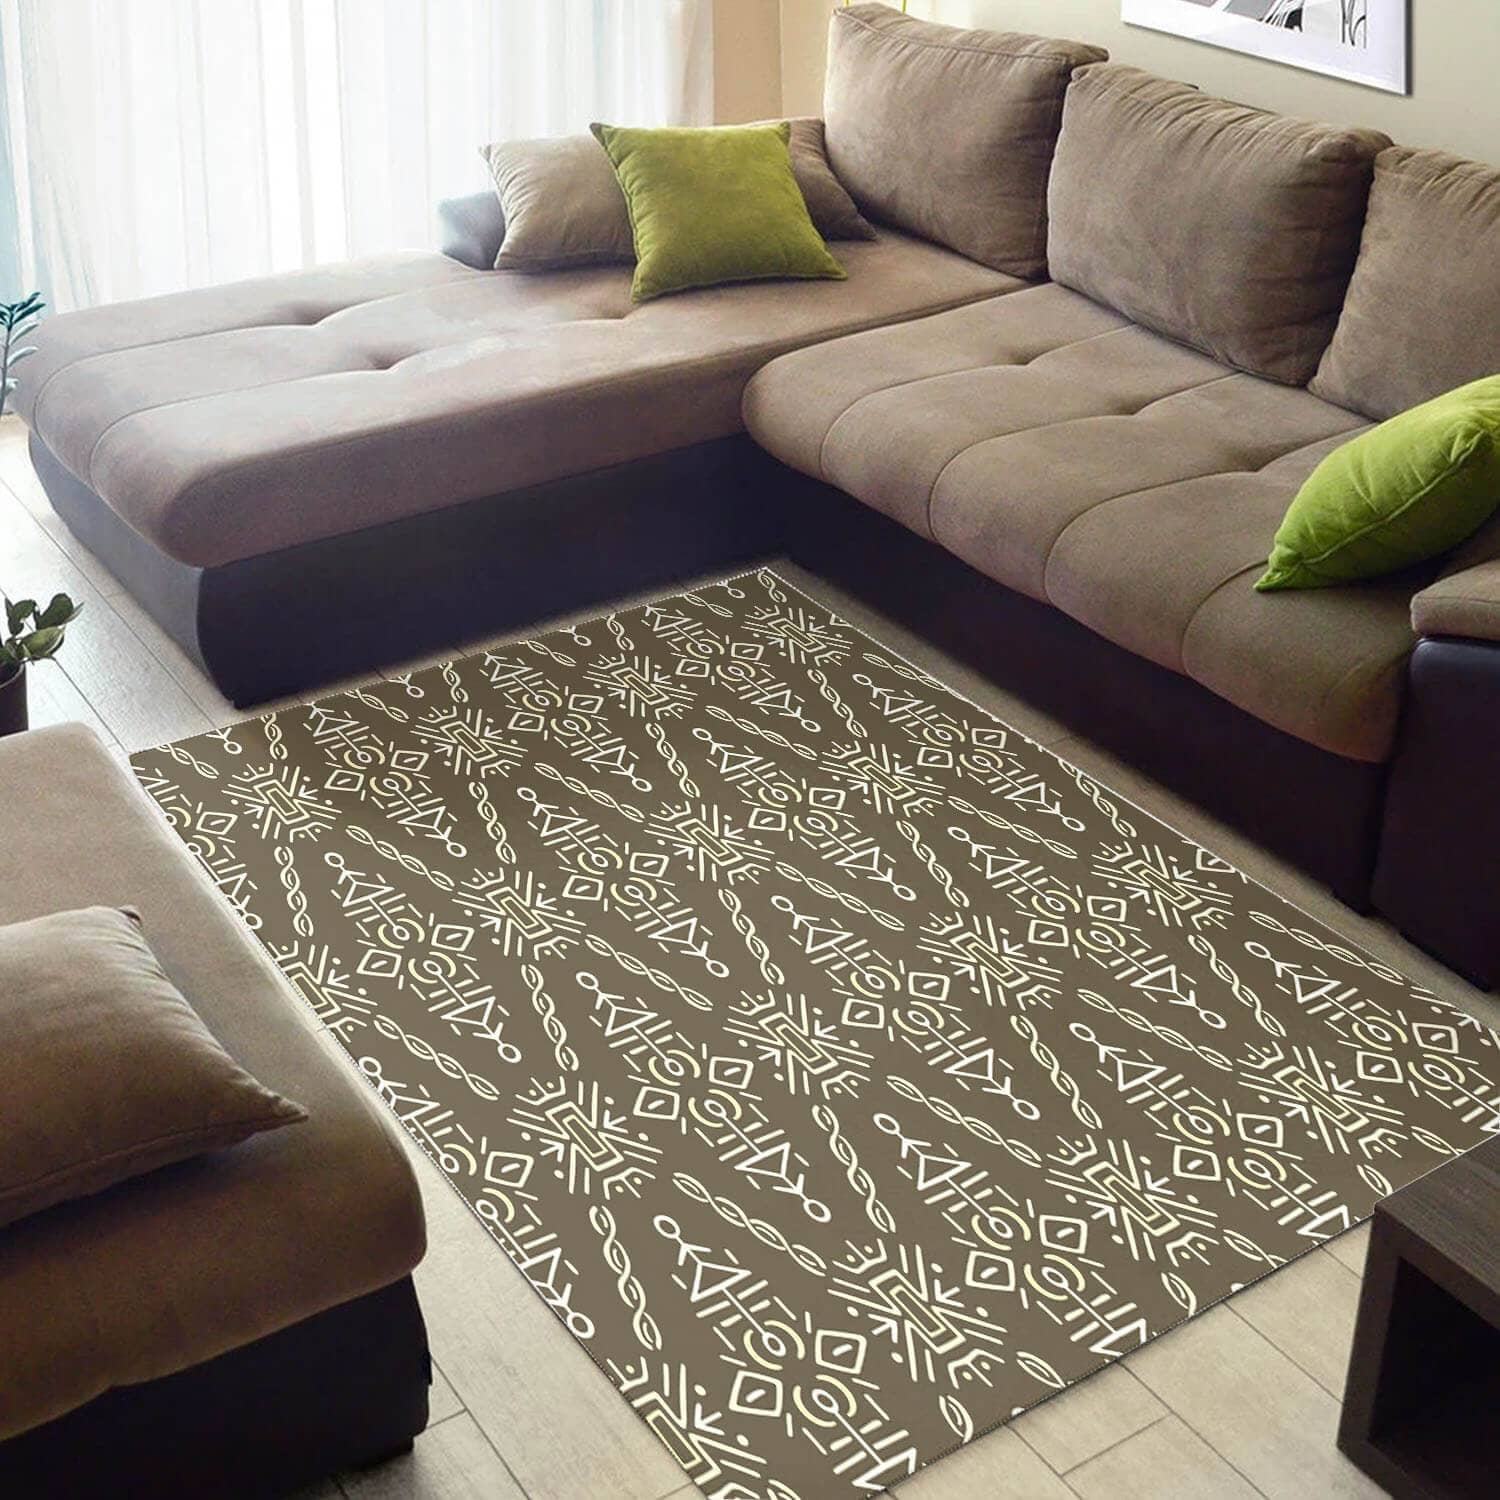 Cool African Style Adorable Black History Month Afrocentric Pattern Art Large Carpet Room Rug